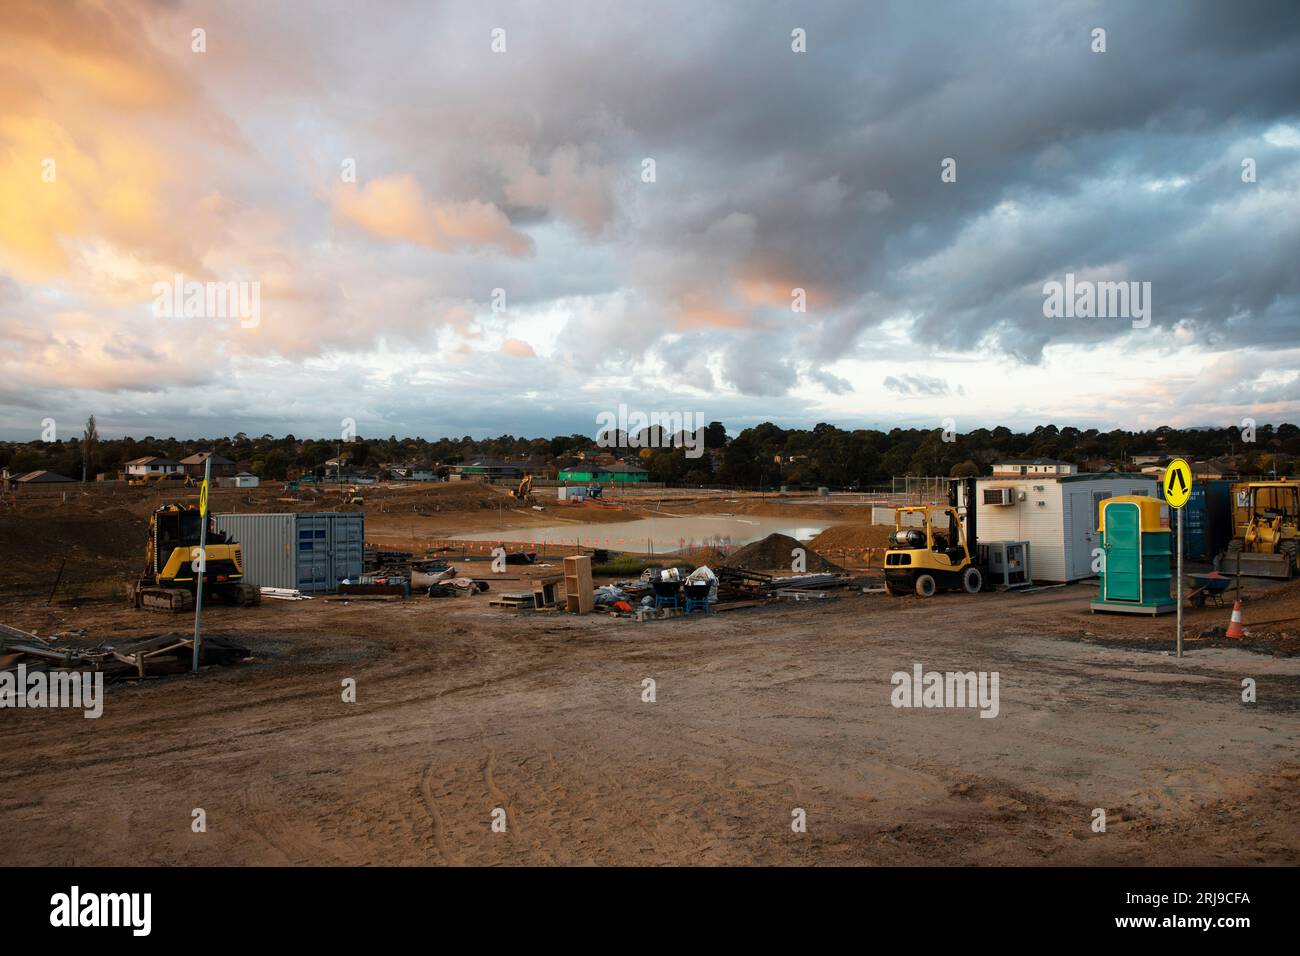 During non-working hours, a construction site stands empty, waiting for the work to resume. Stock Photo